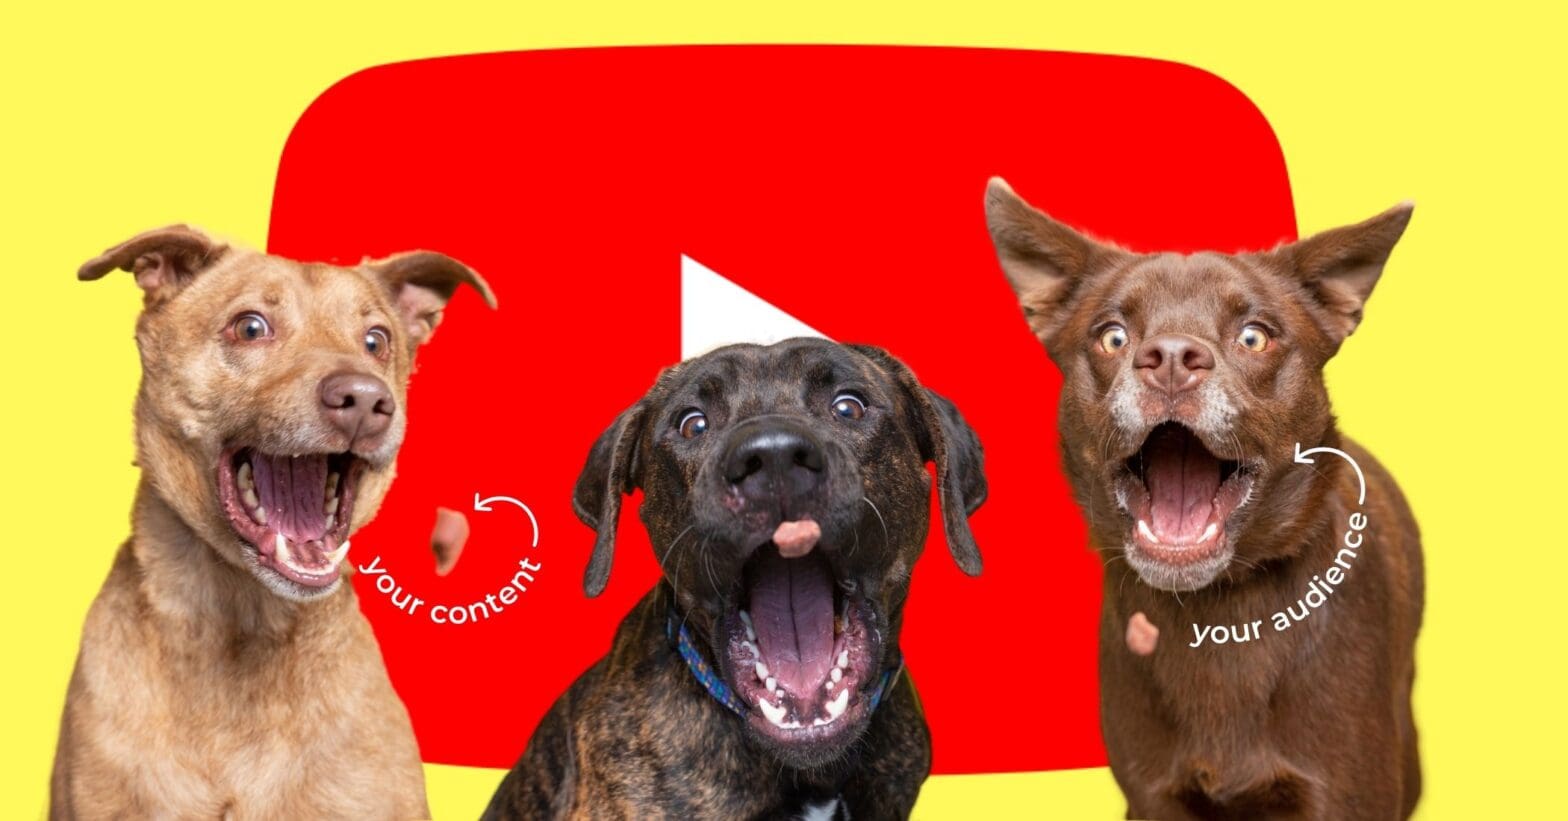 YouTube algorithm hacks delivering dog treats to hungry dogs